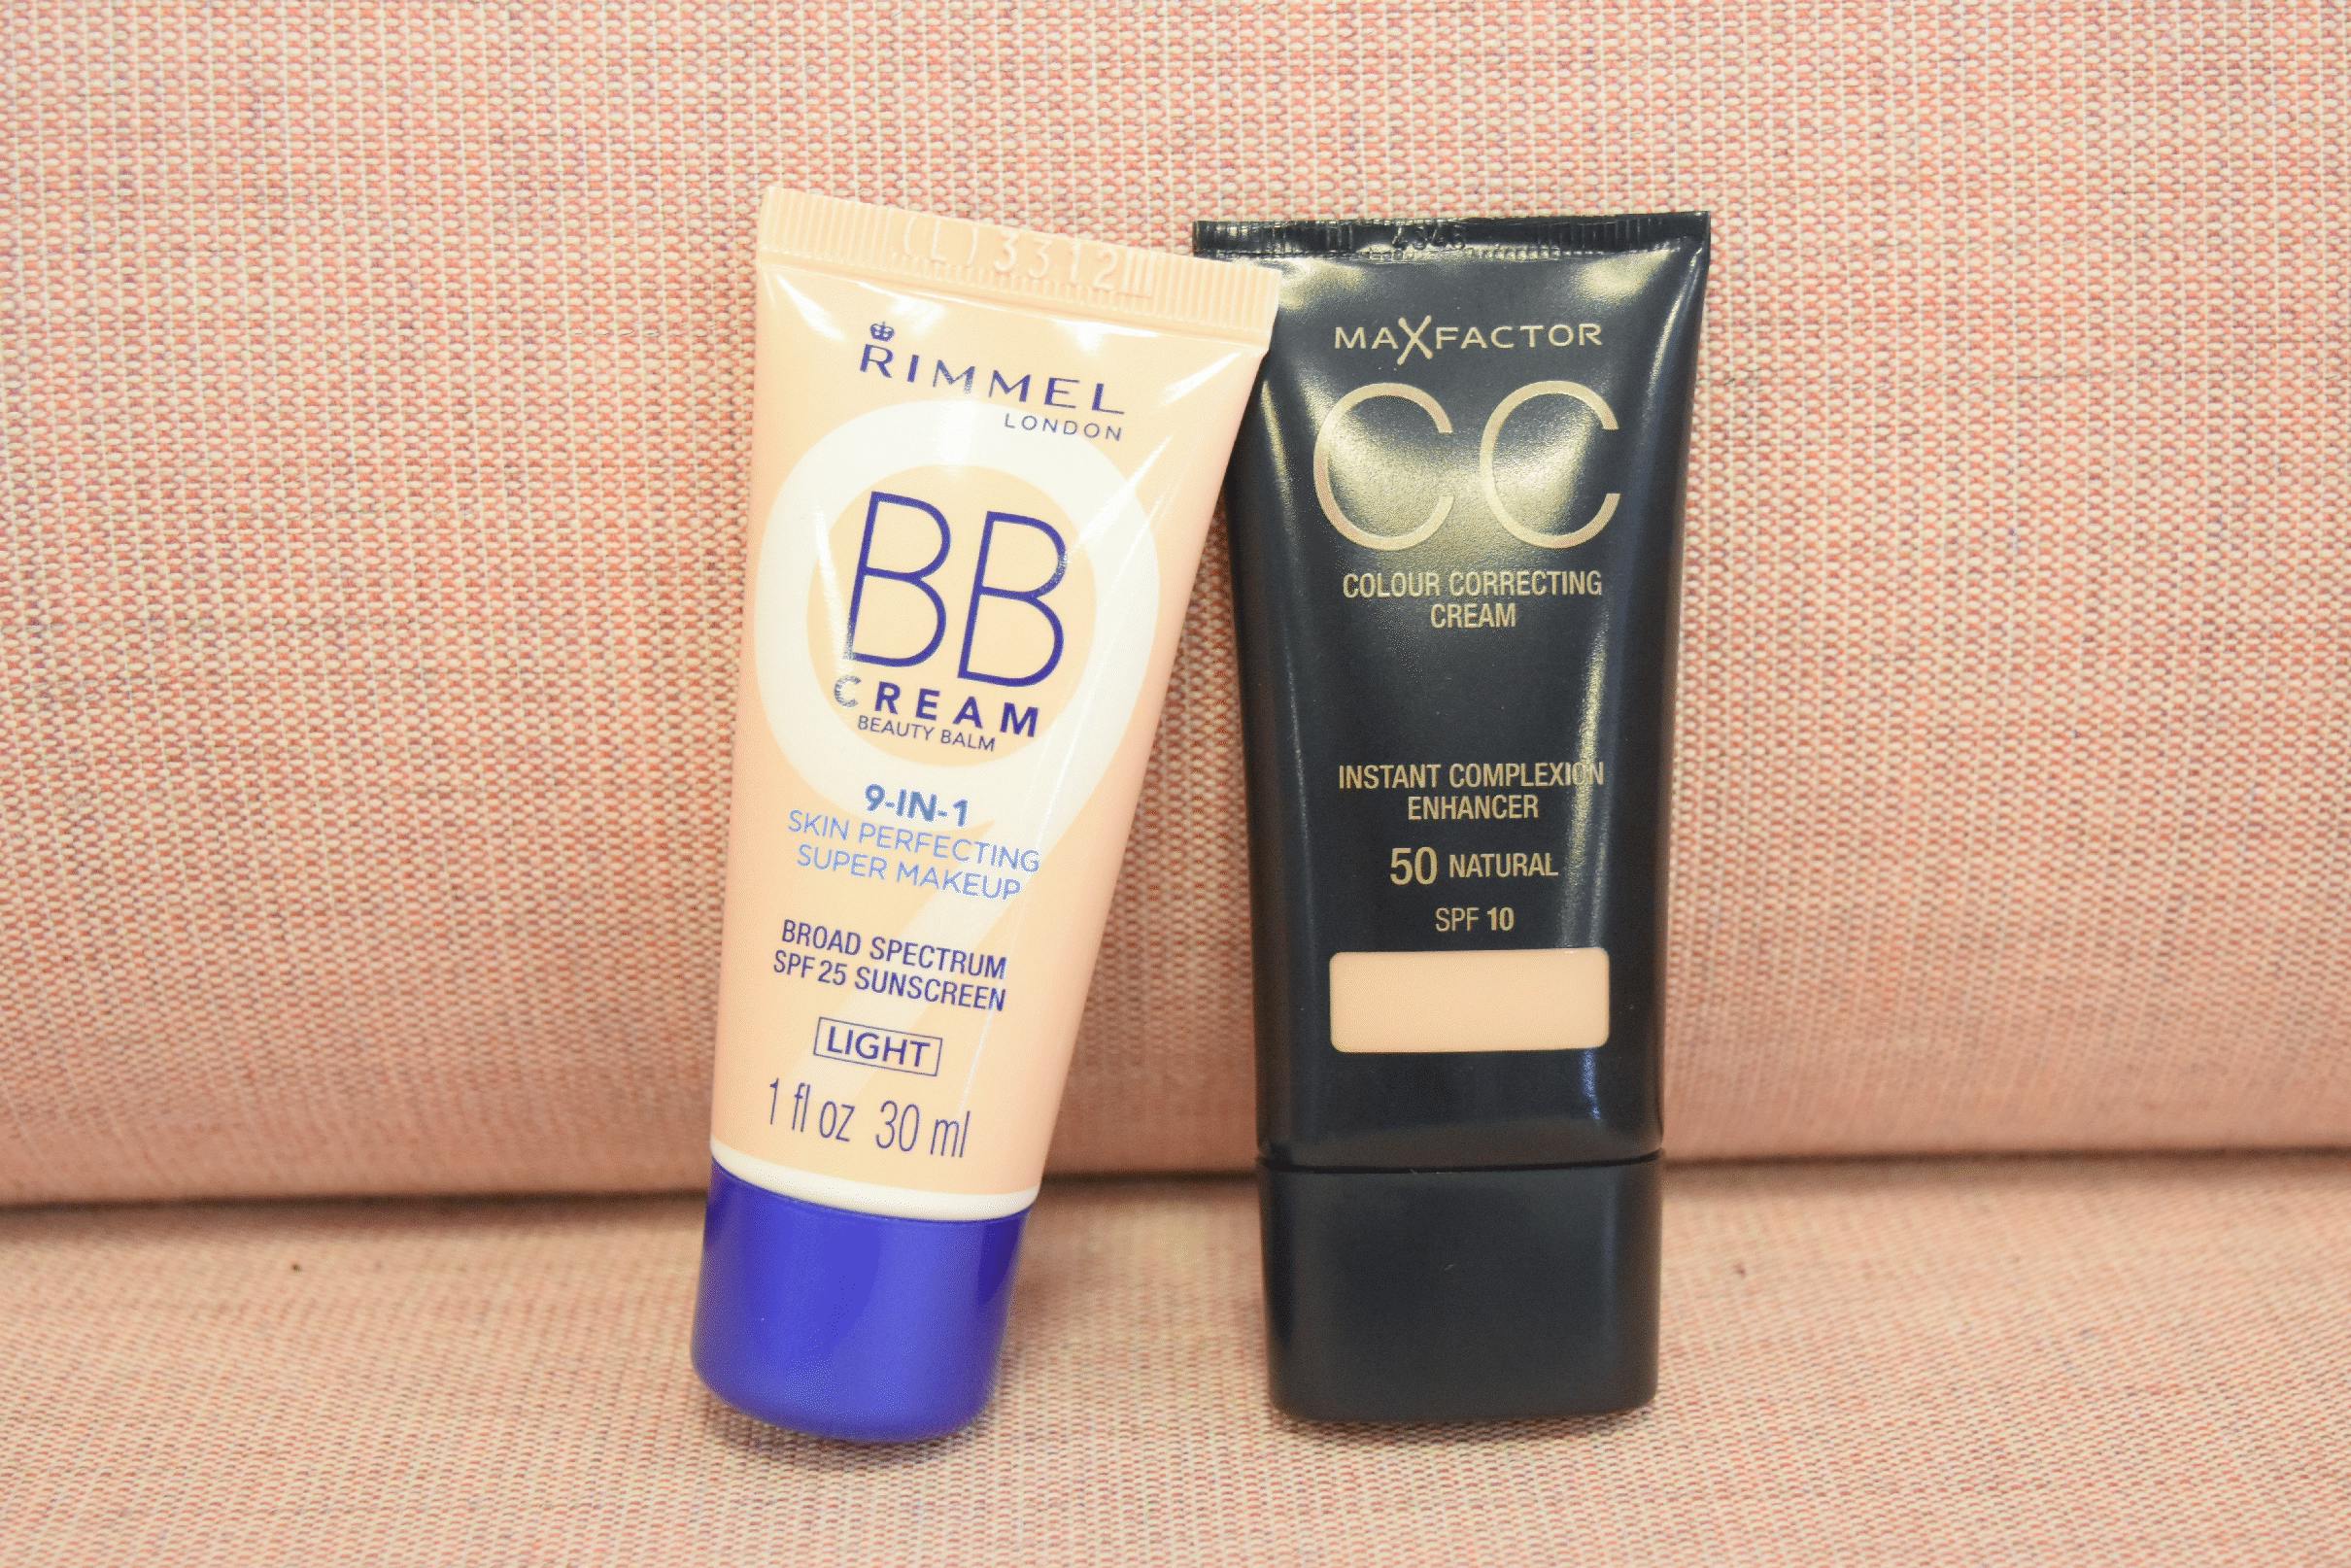 BB CC DD Creams. When will it end? - The Small Things Blog